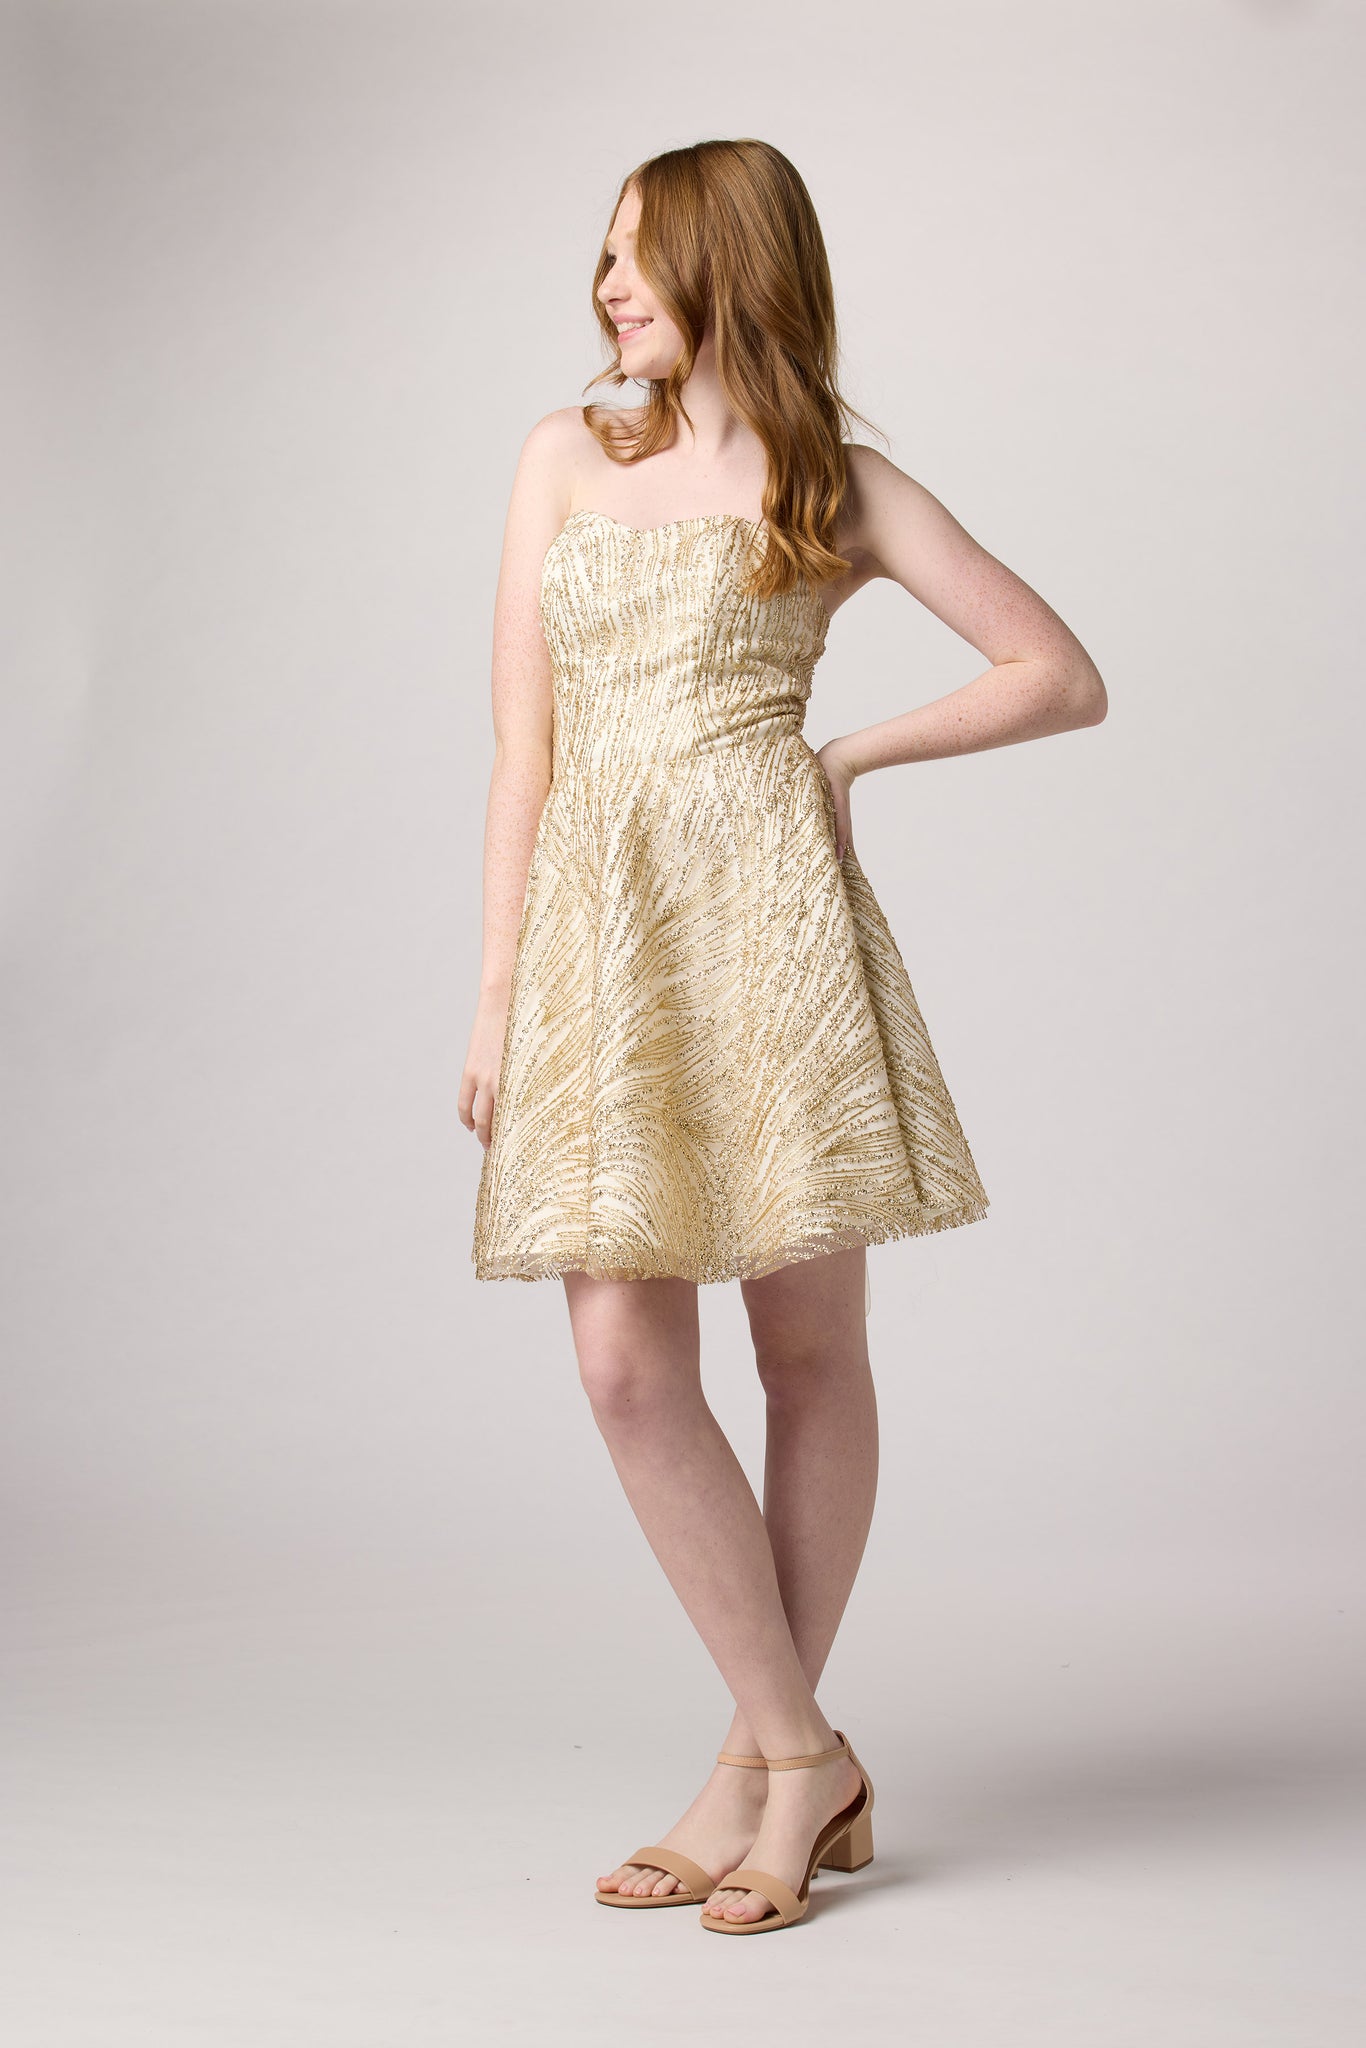 Red head in a gold beaded dress with nude shoe.